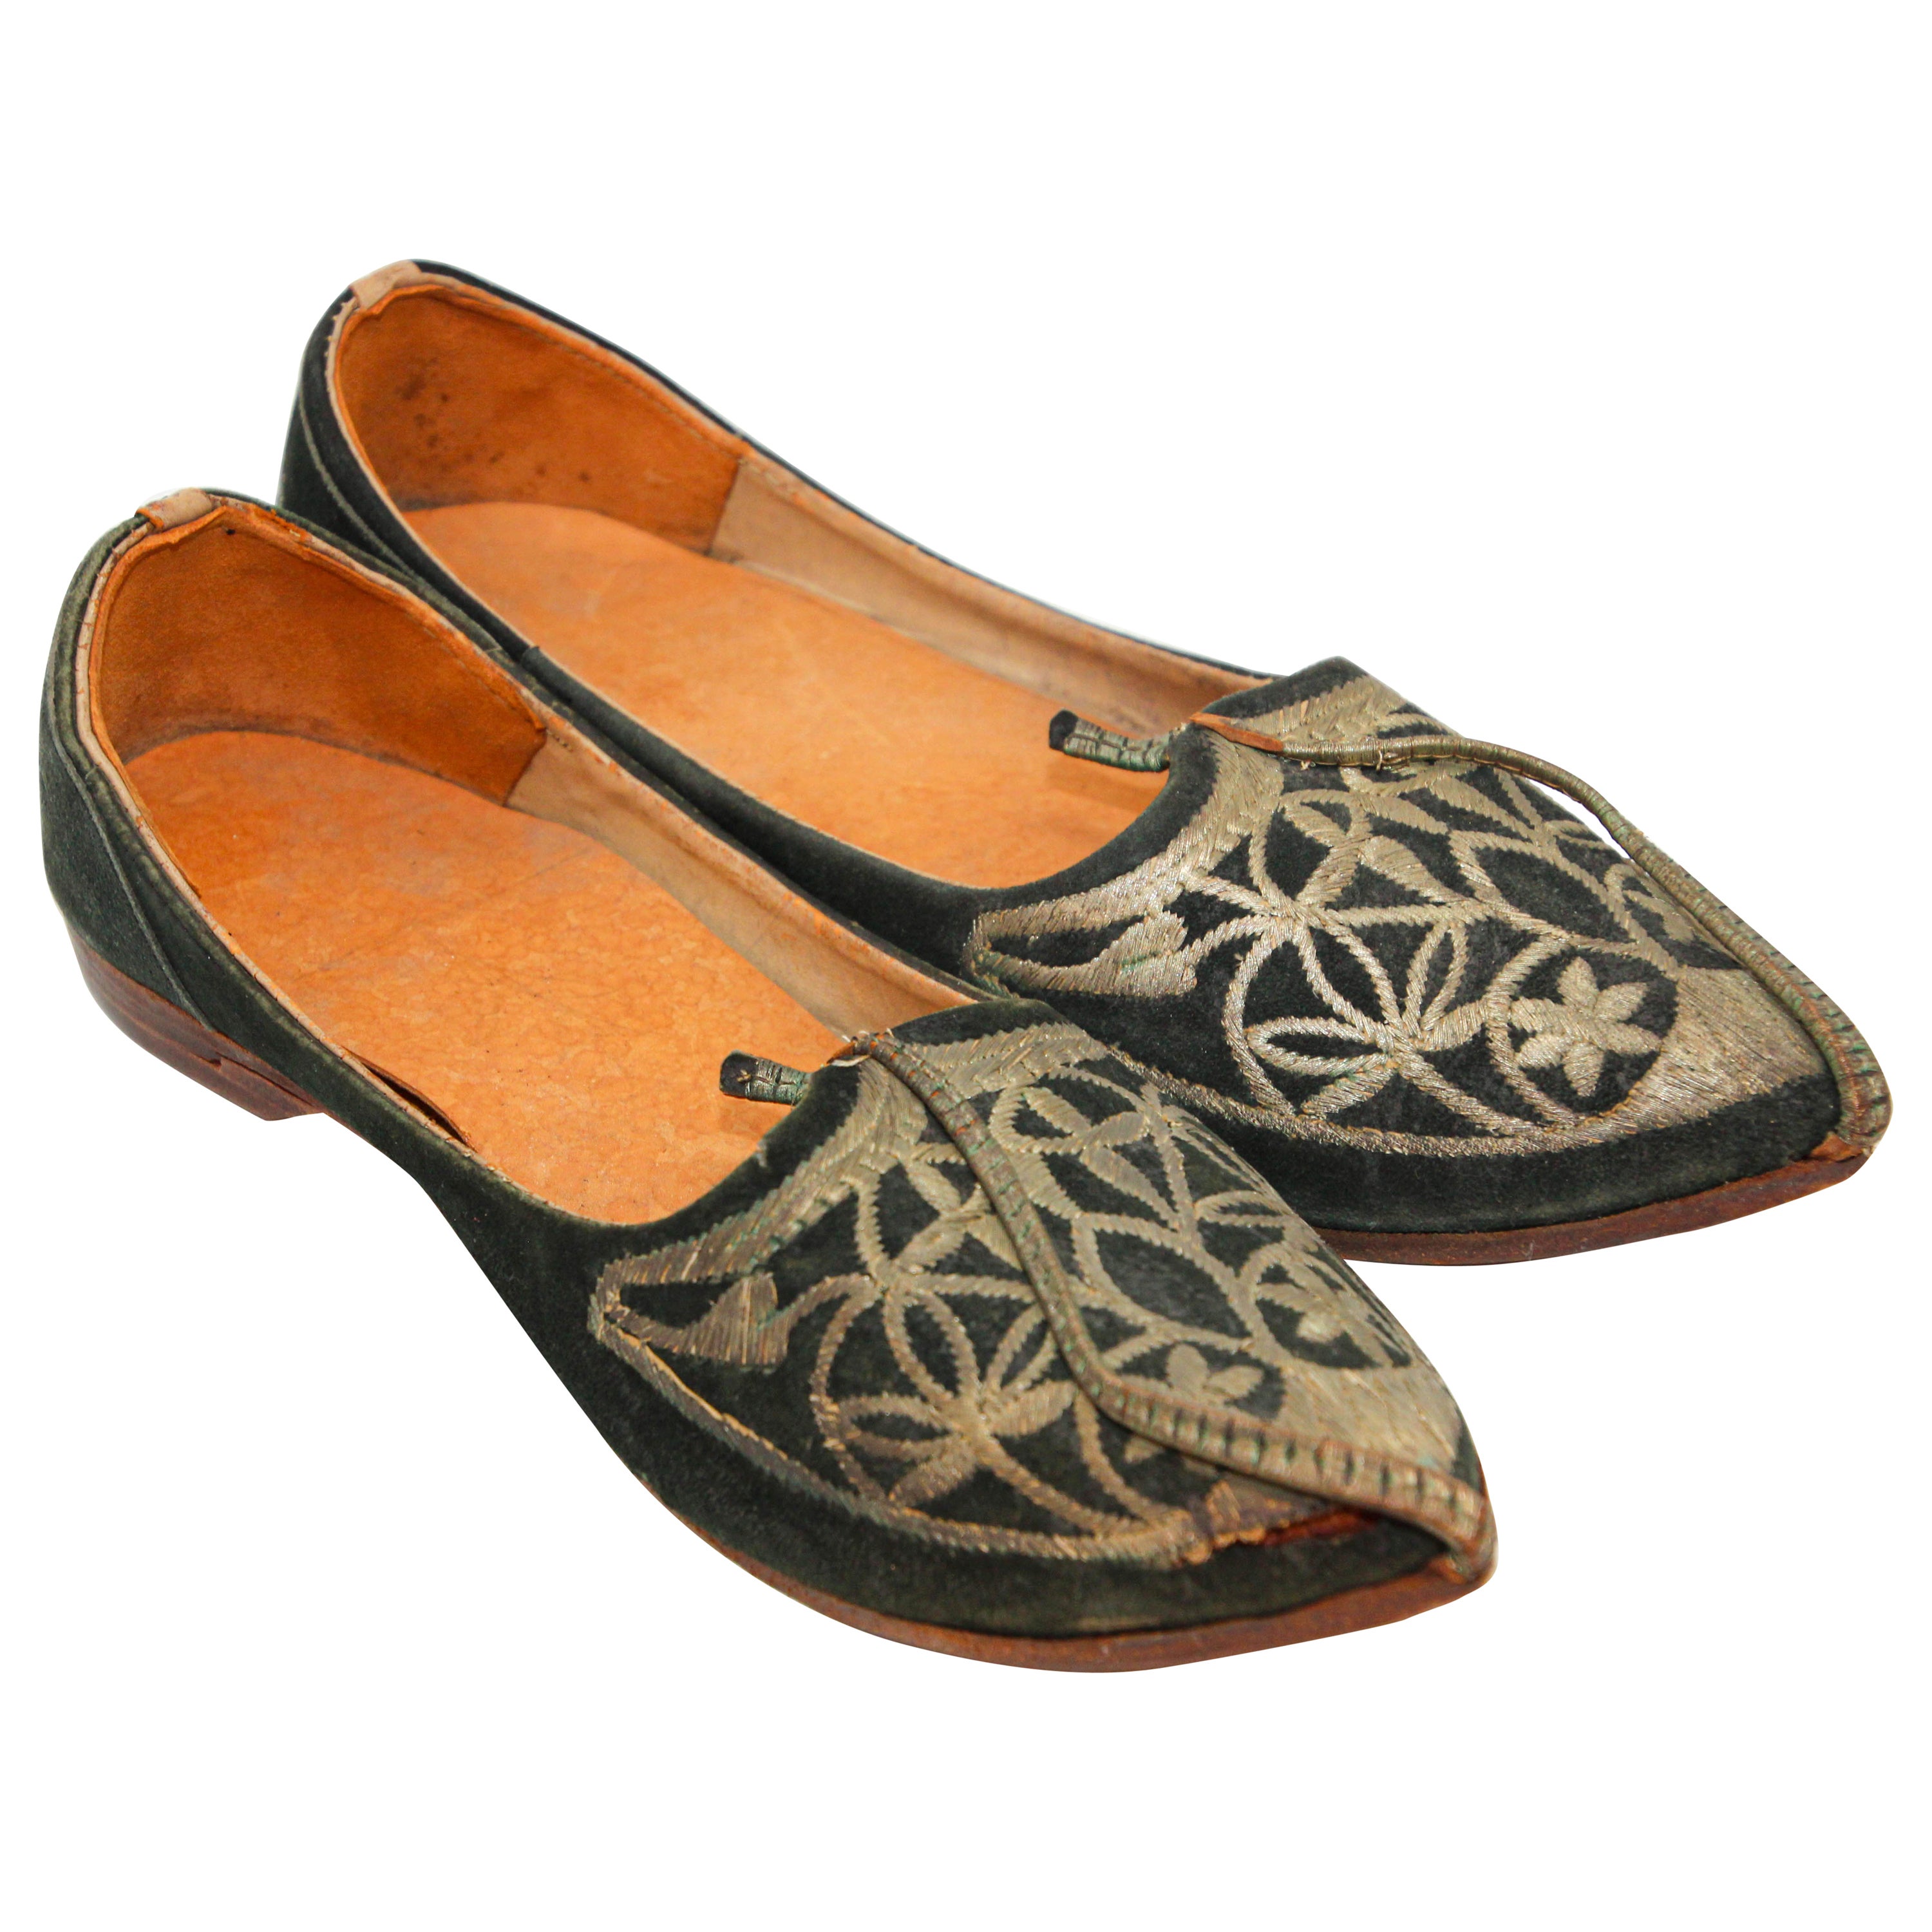 Moorish Mughal style Curled Toe Black Leather Shoes from Tony Duquette Estate For Sale